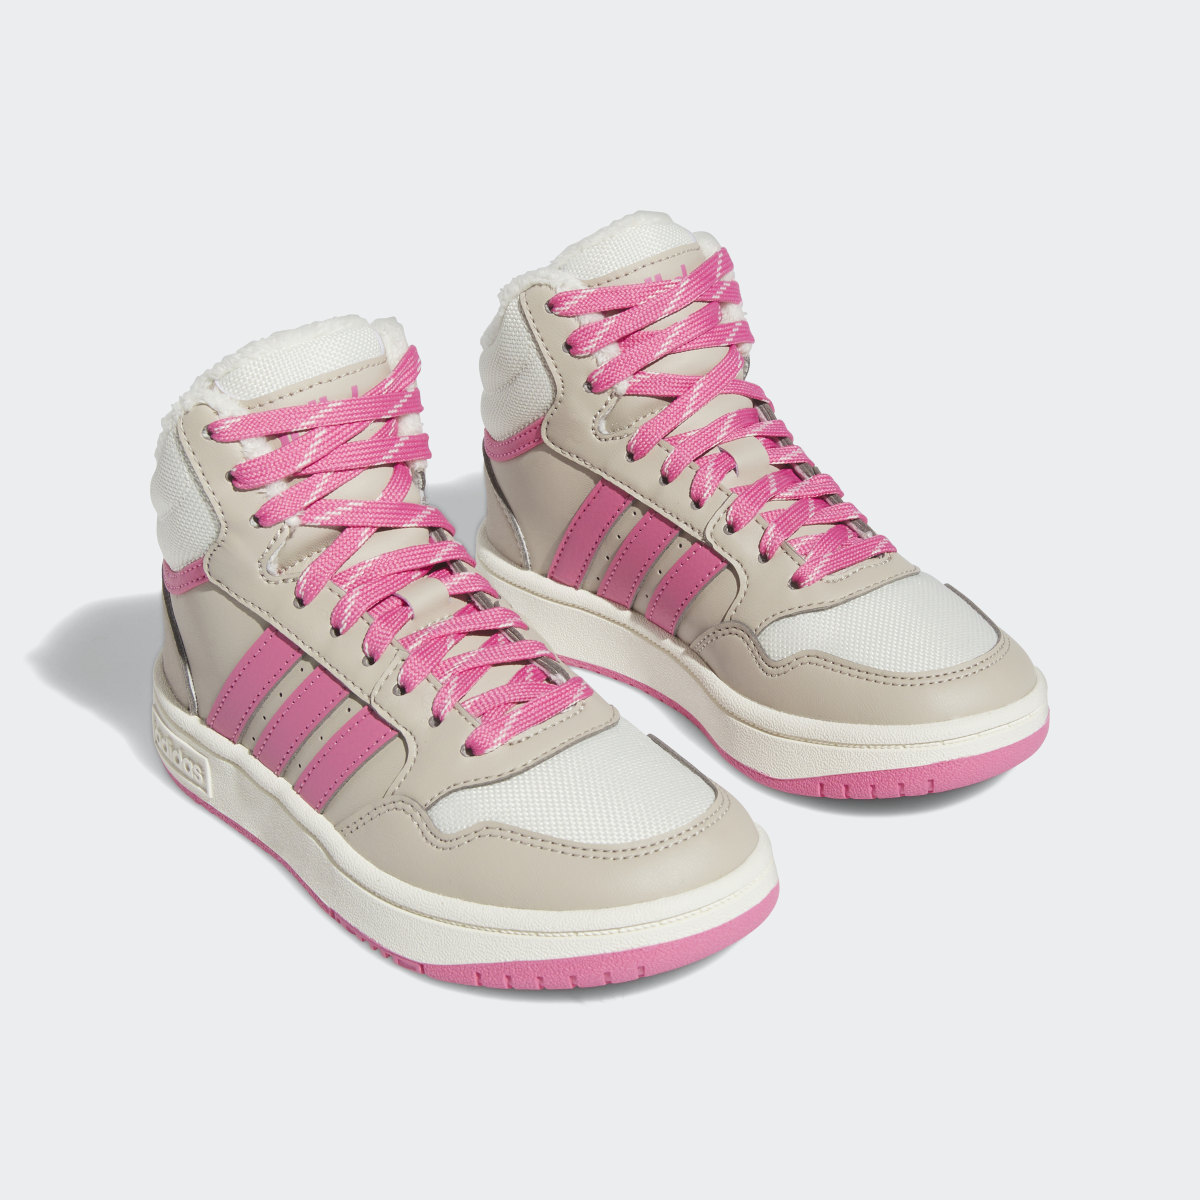 Adidas Hoops Mid 3.0 Shoes Kids. 4